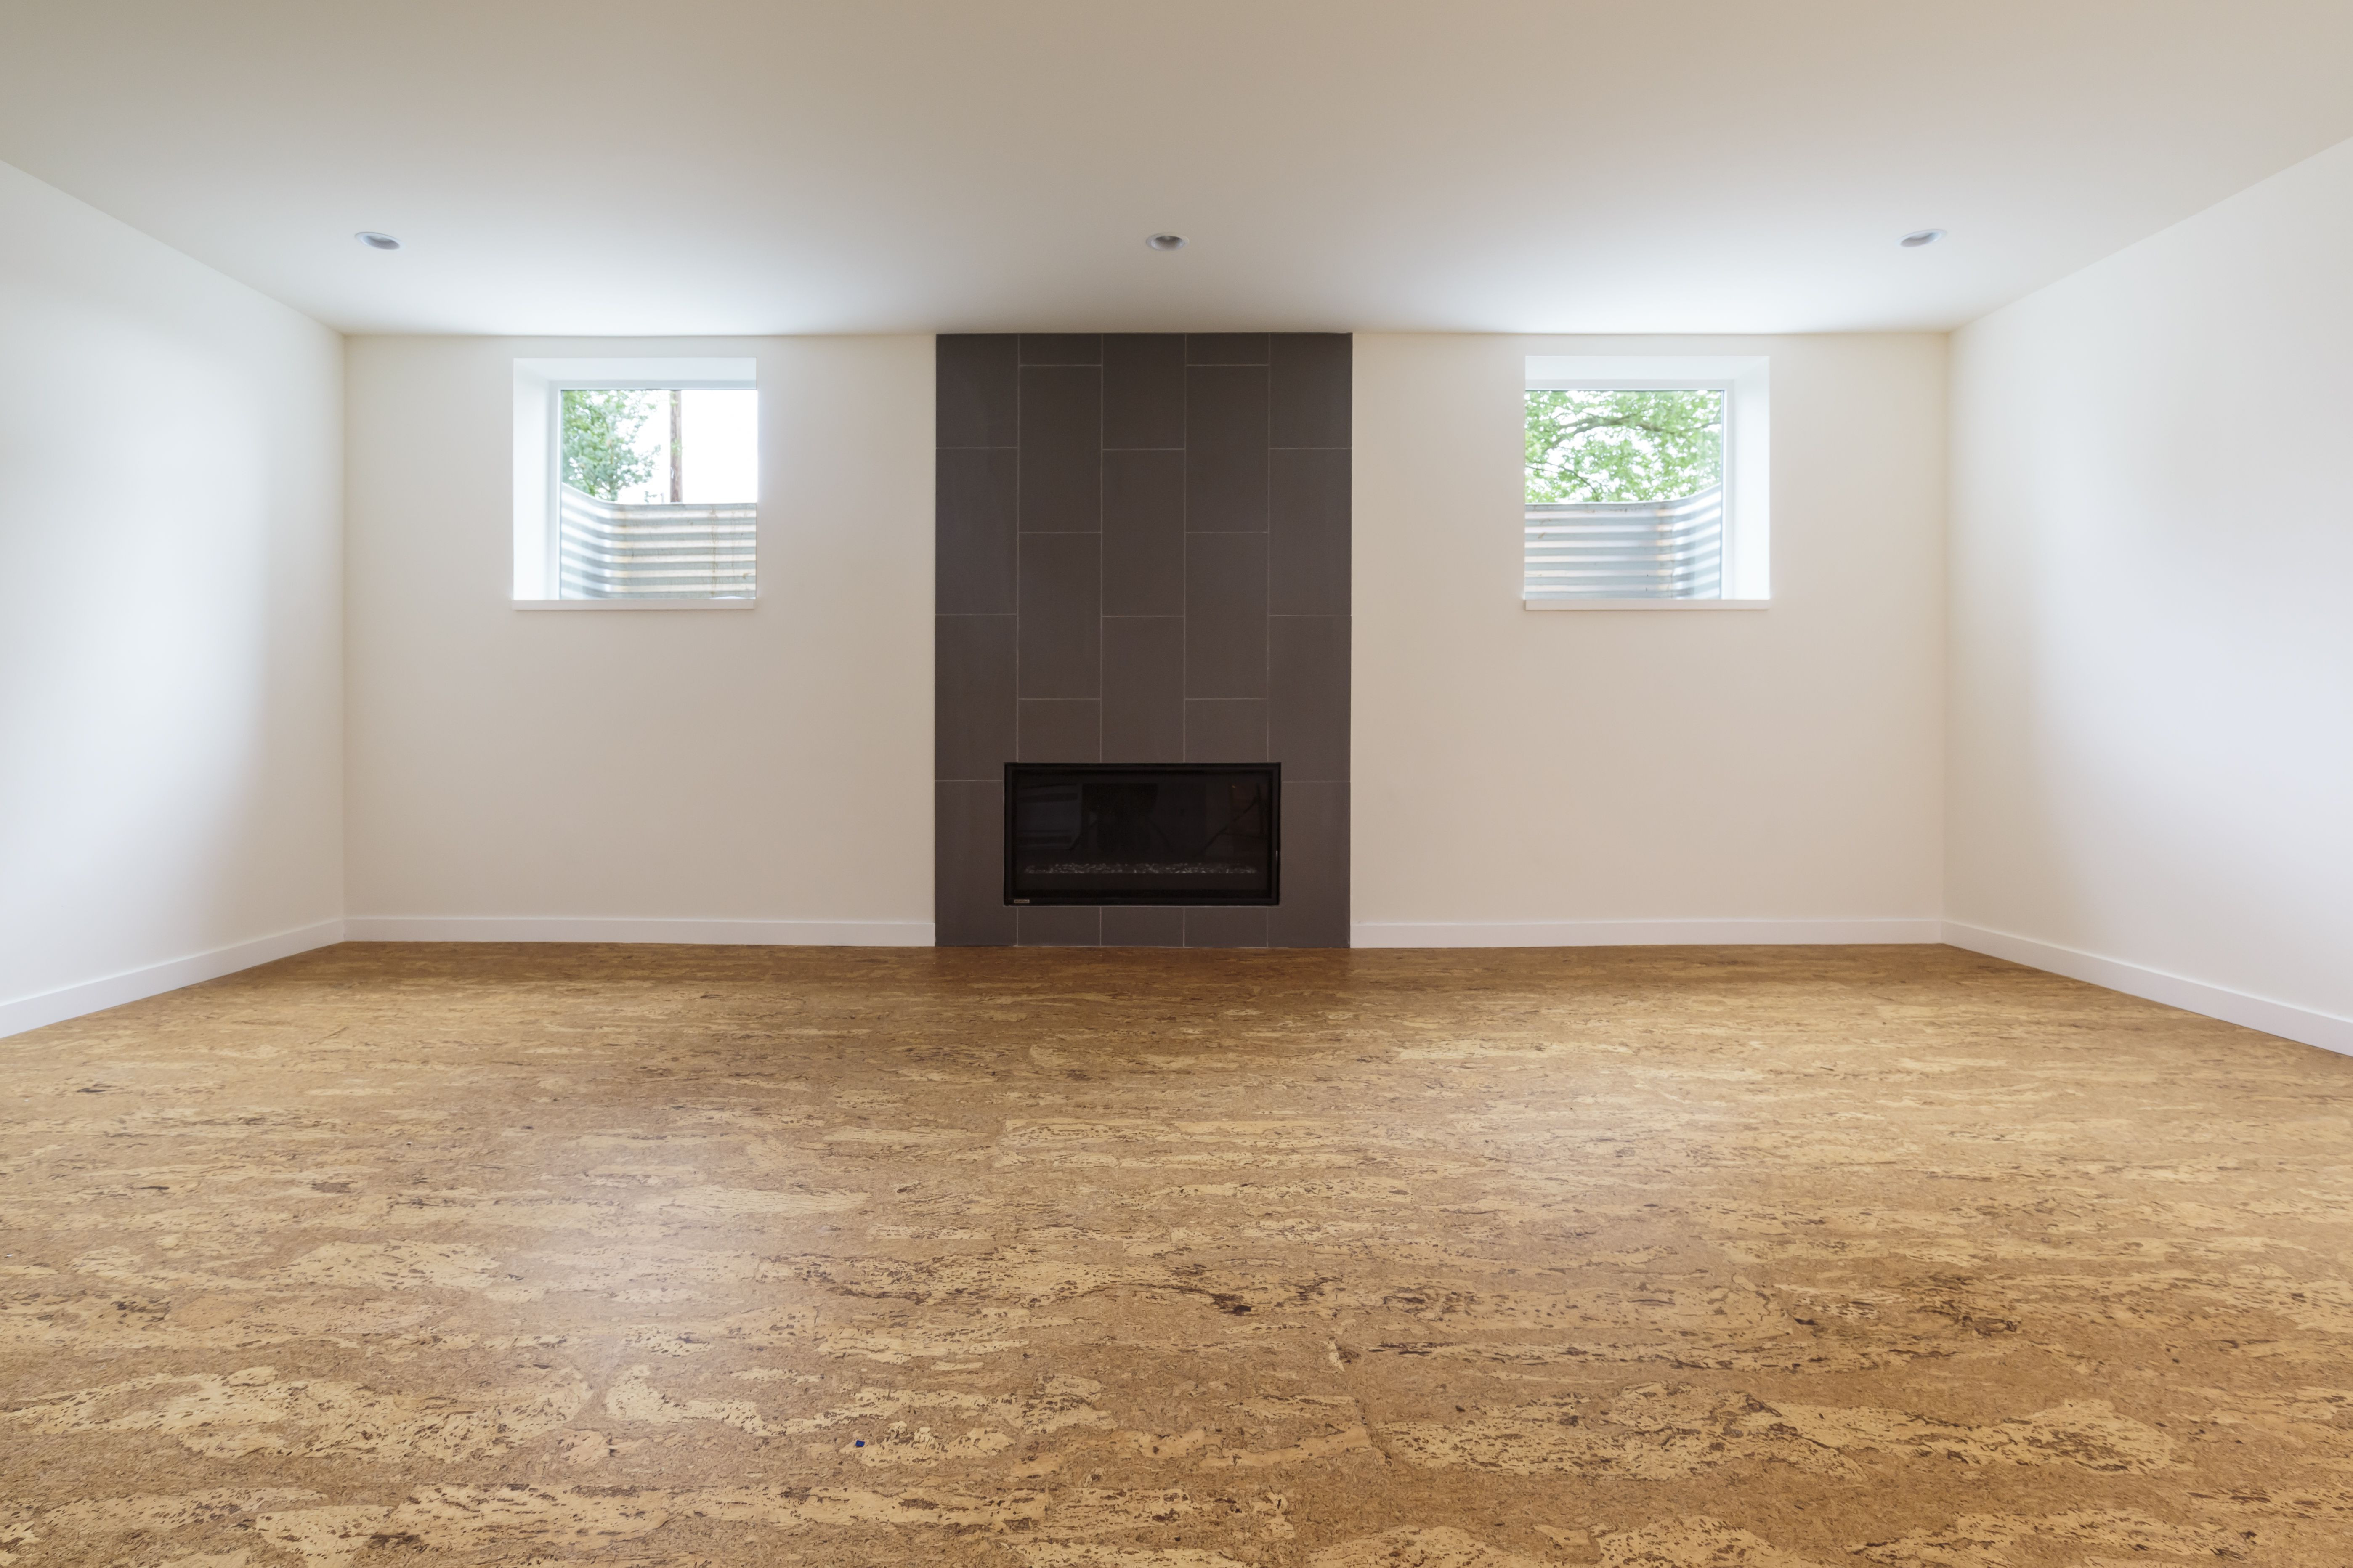 Light Hardwood Floors Bedroom Of A Gallery Of Cork Flooring Designs for Cork Flooring In Unfurnished New Home 647206431 5b4540a646e0fb00543e2ba0